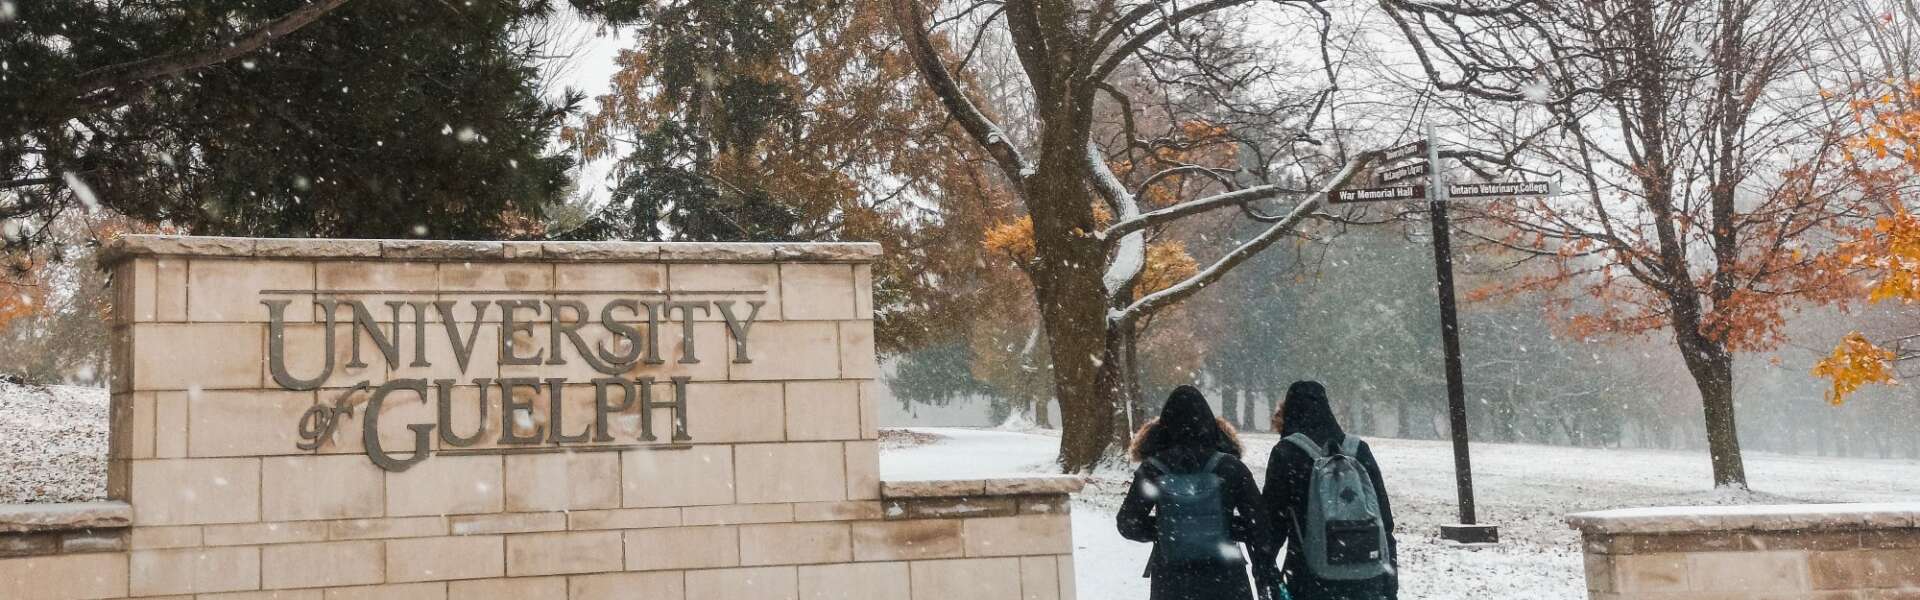 Students wearing black parkas and blue jeans walk past a beige stone sign that says "University of Guelph" during snowfall.